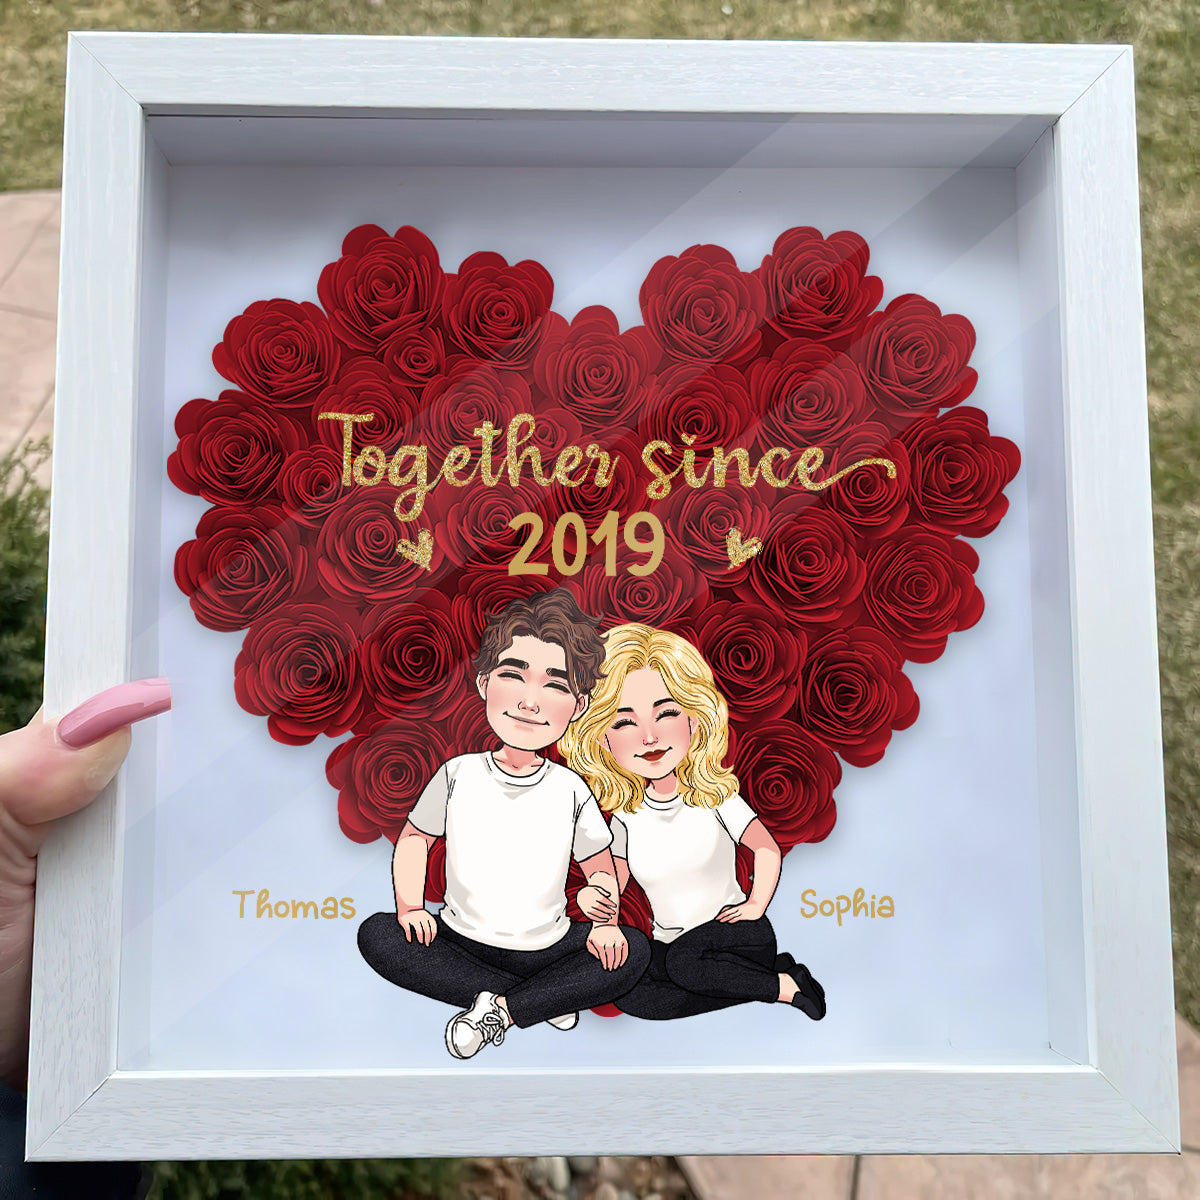 Discover Together Since Custom Couple Gift Personalized Flower Frame Box